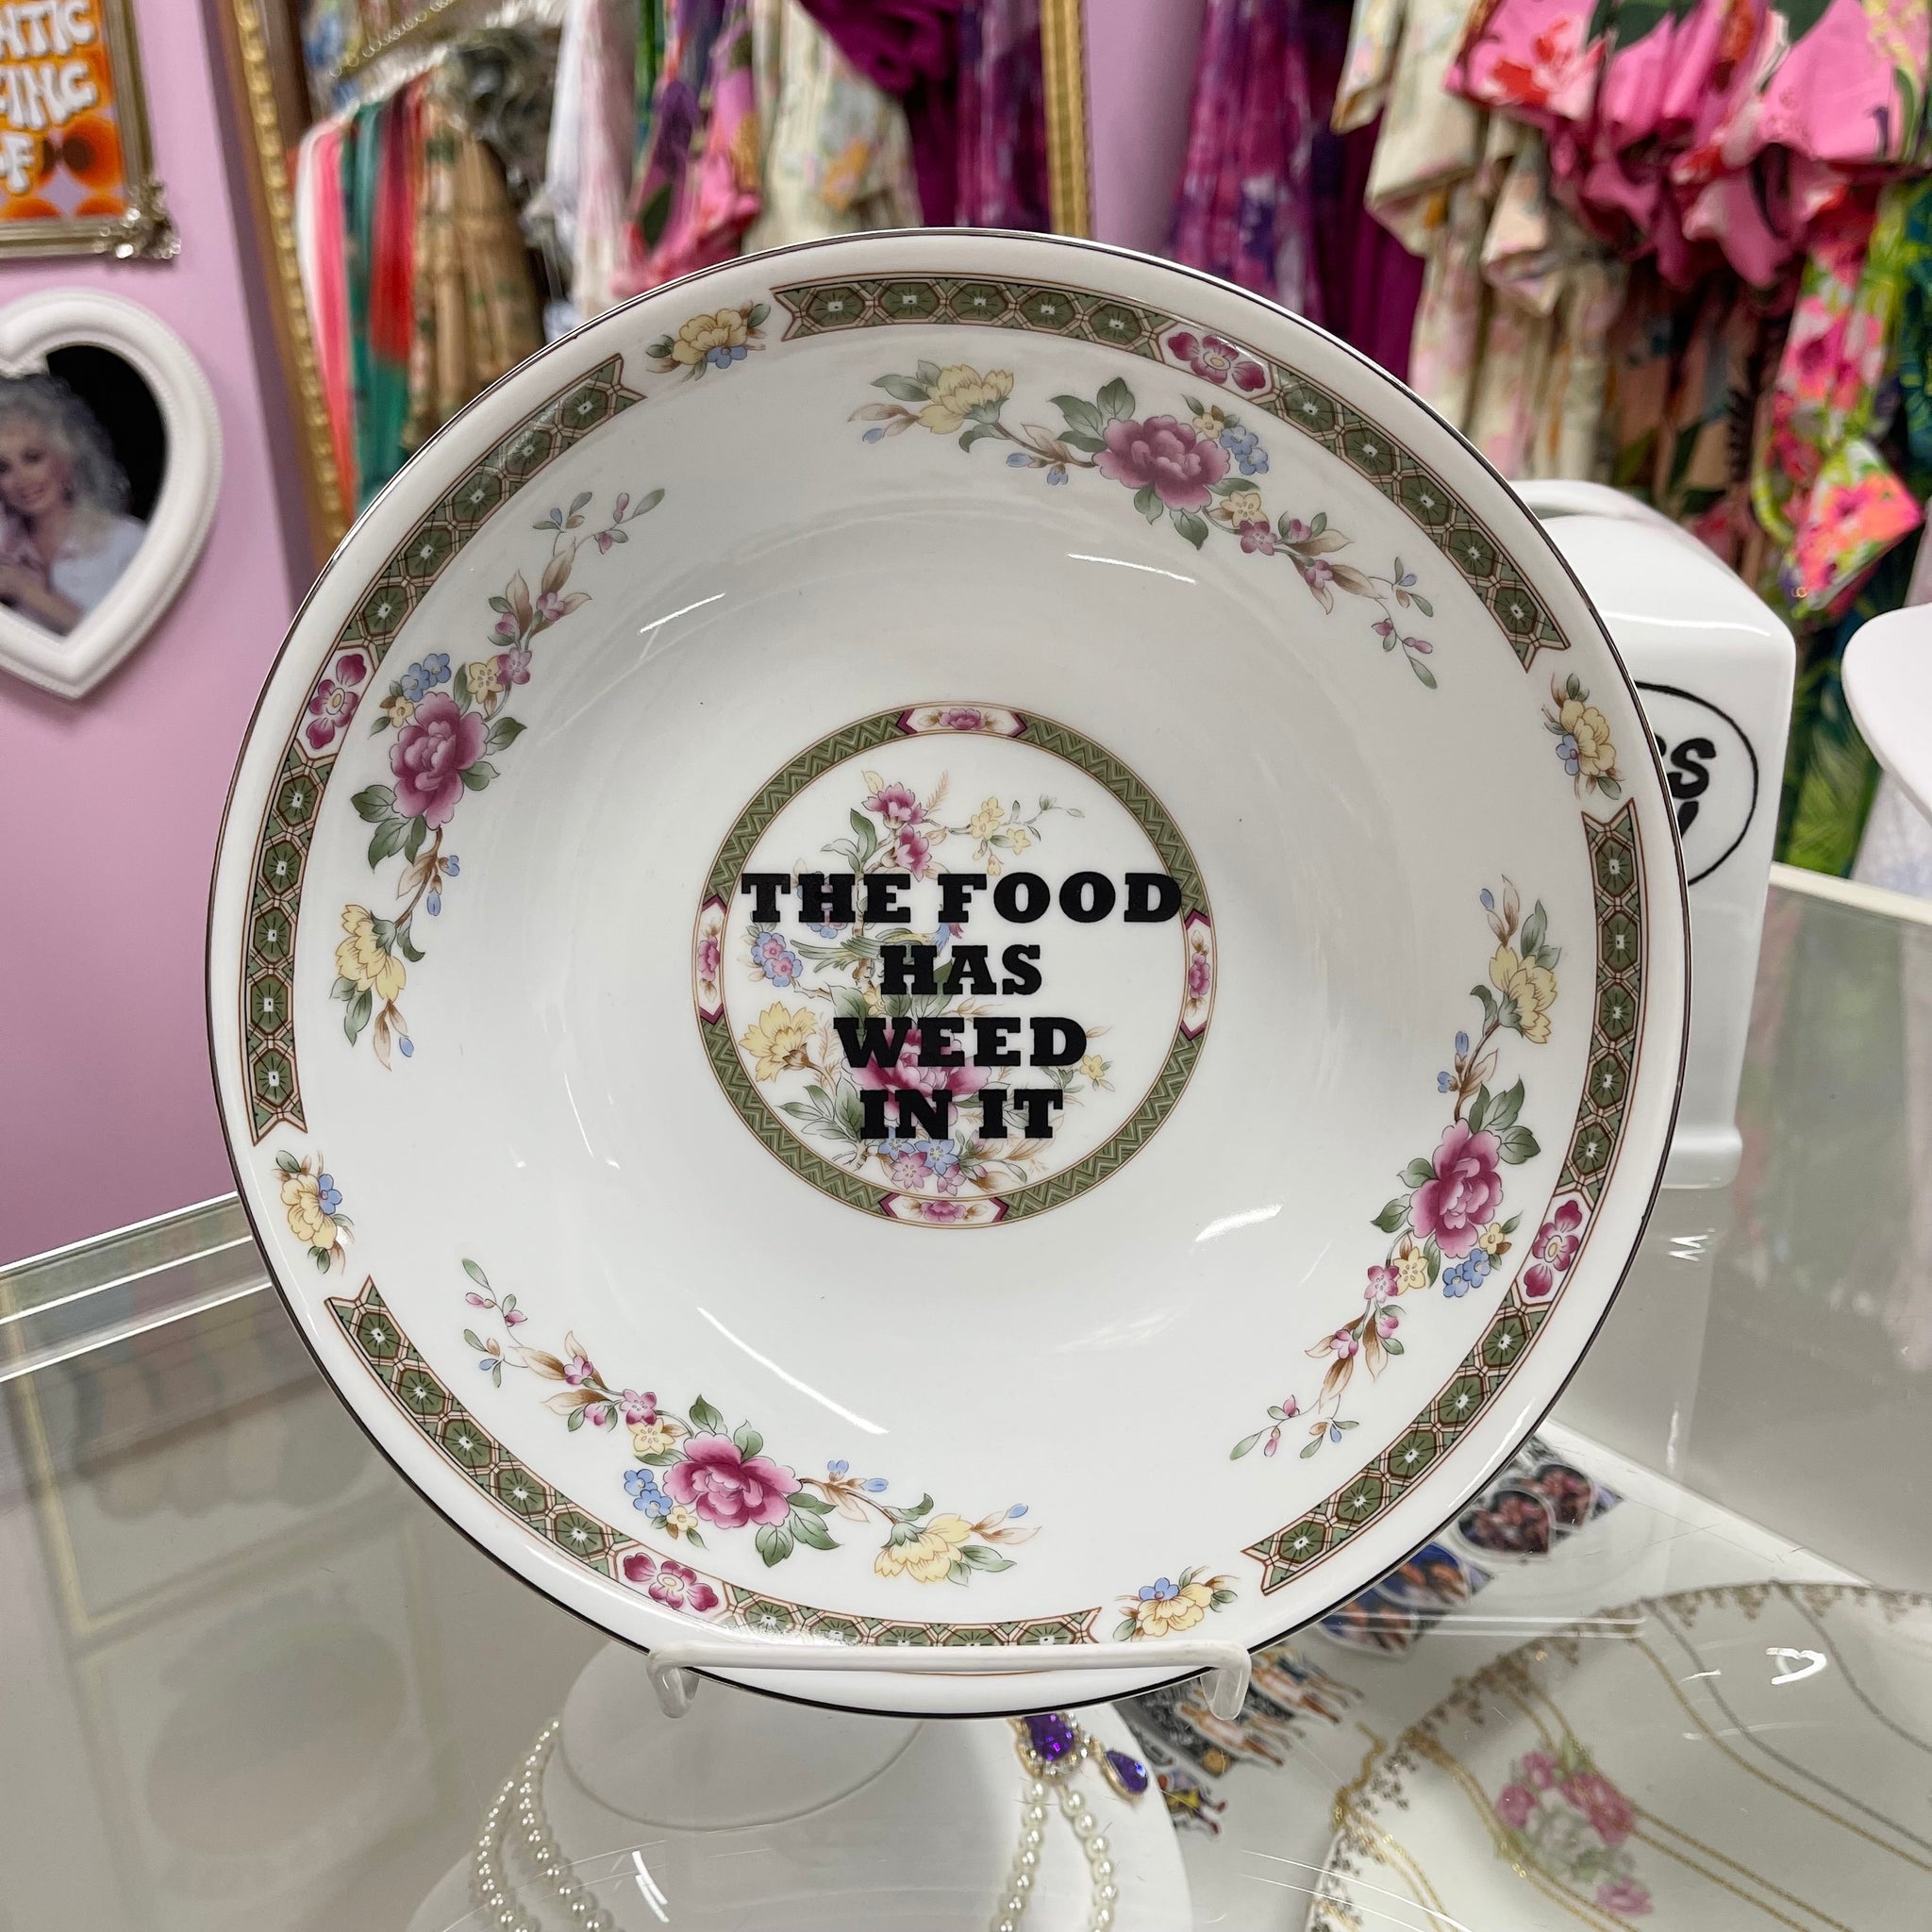 The Food Has W*ed In It Large Vintage Serving Bowl